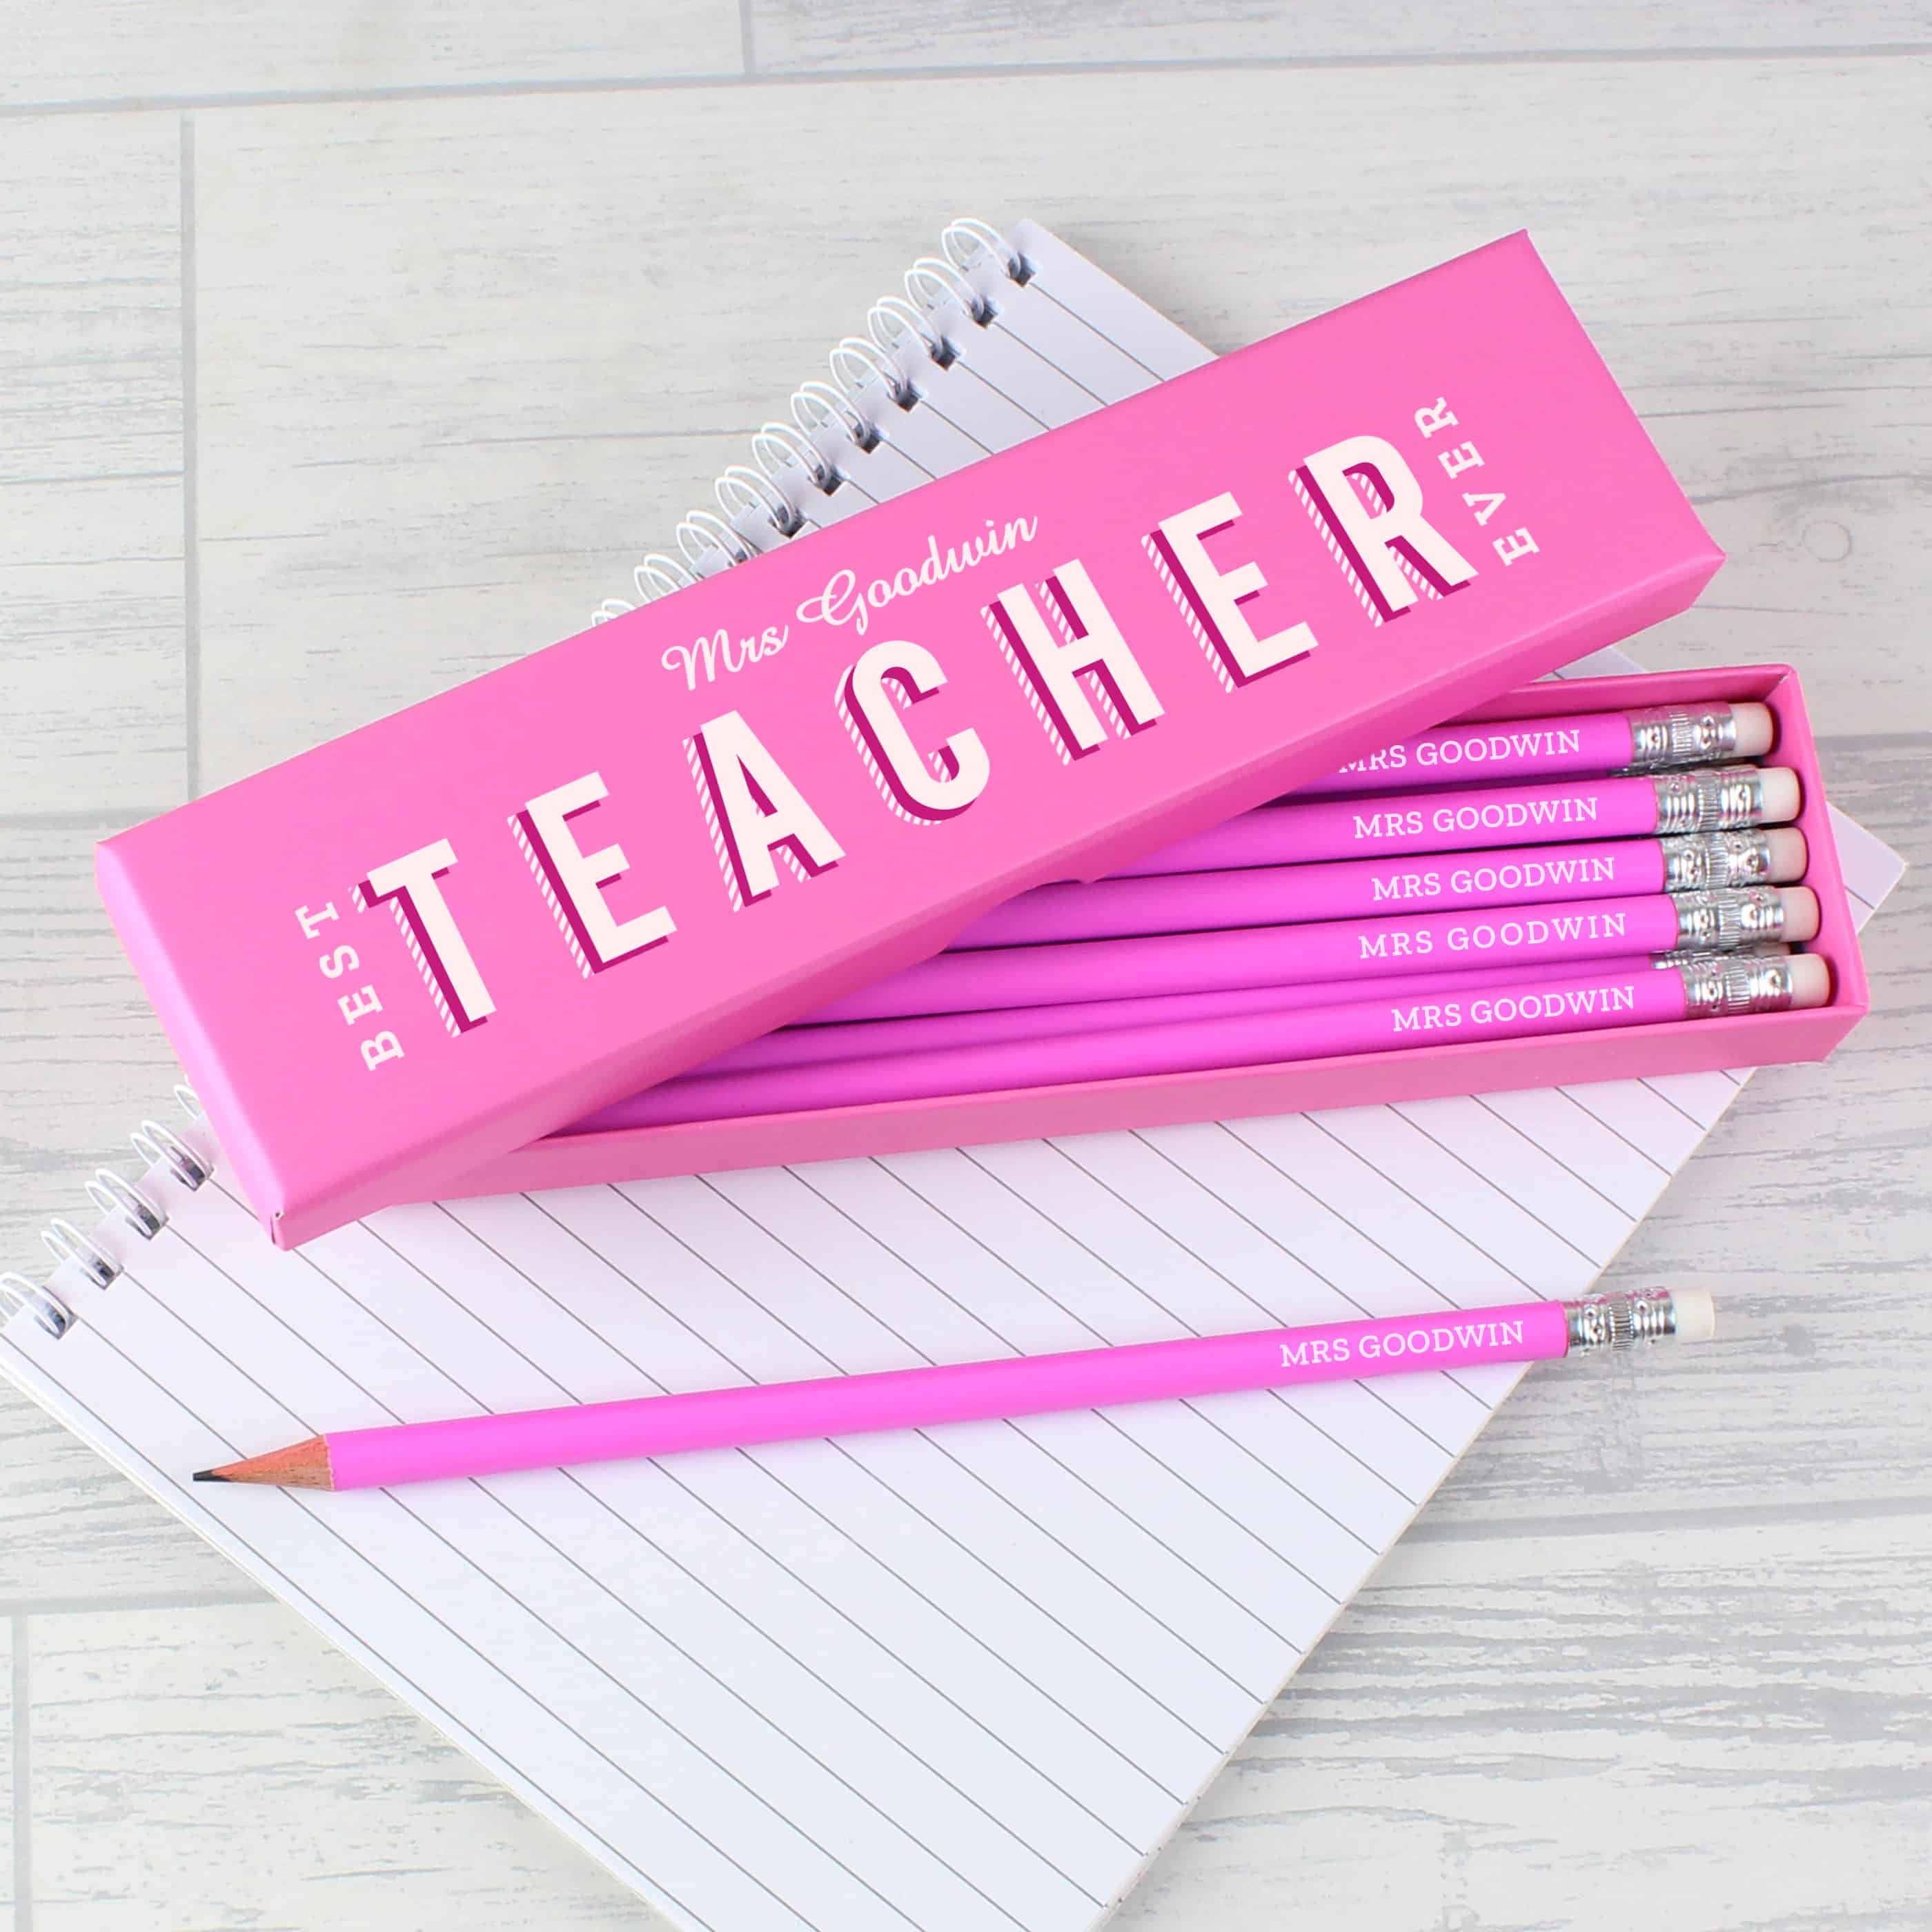 personalised best teacher ever pencil set contains 12 pencils with erasers, available in pink in or blue. Teacher keepsake gift